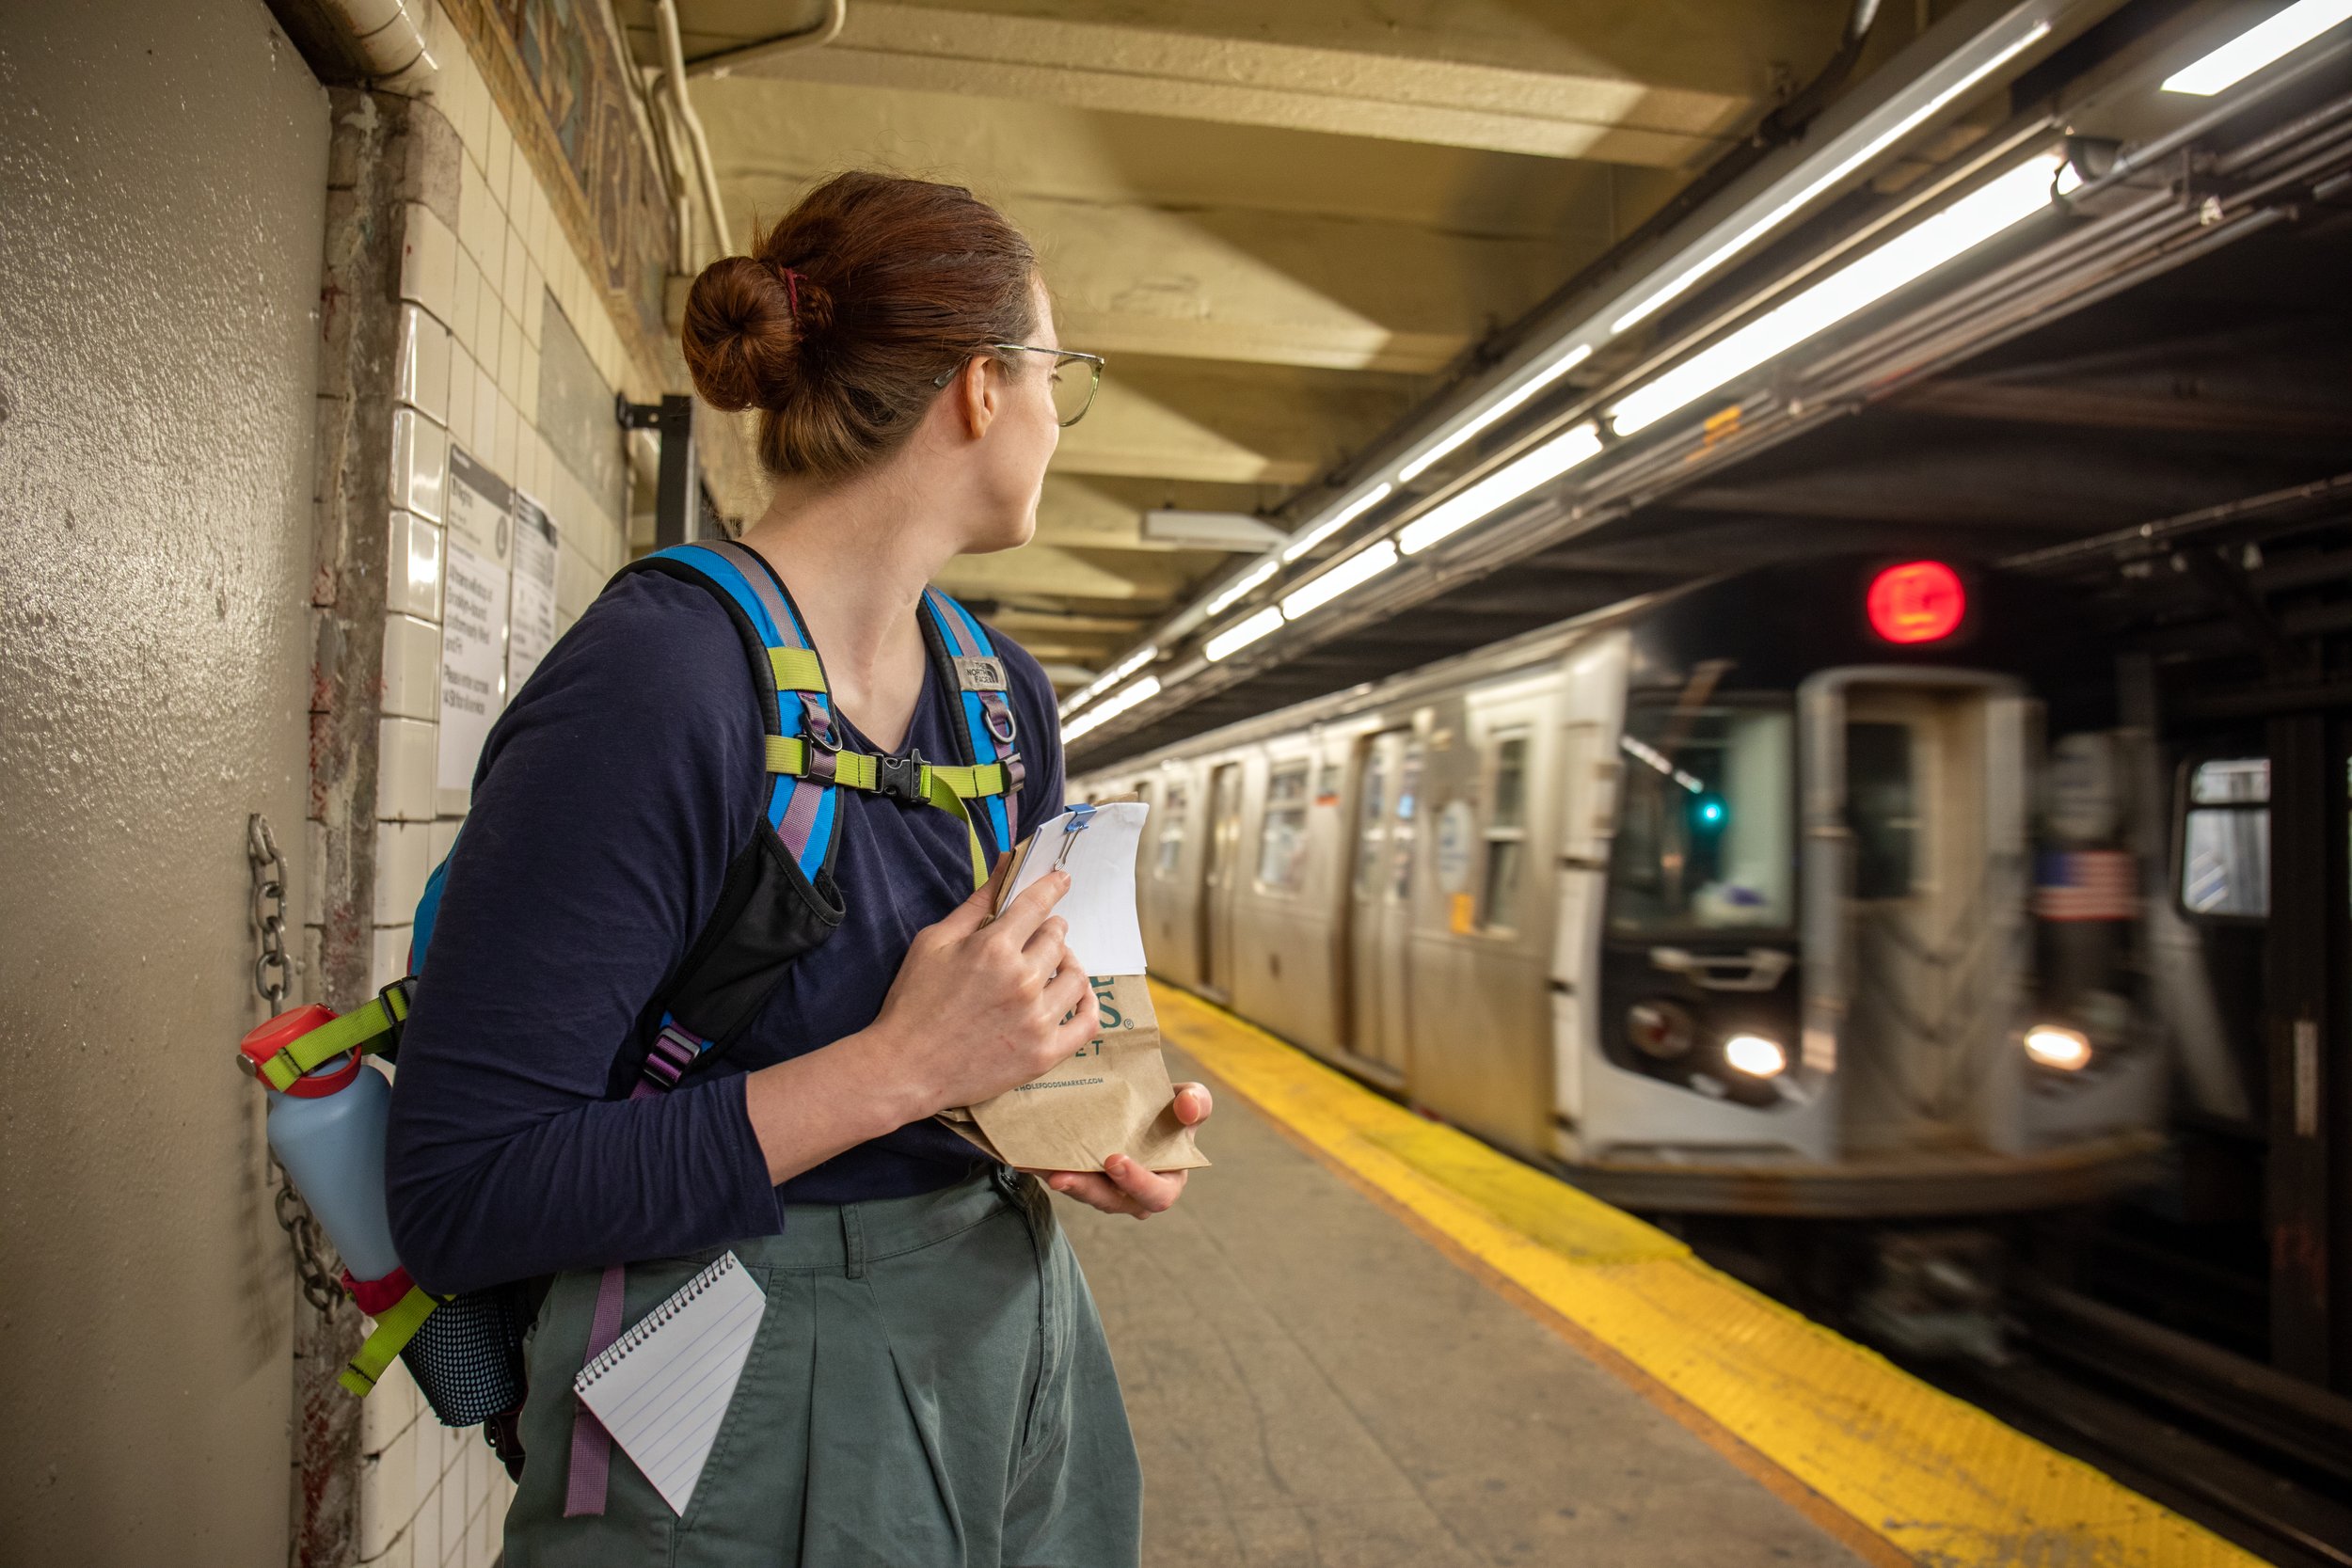  The L Train arrives at Union Square as Grueskin holds the injured warbler to her chest. She worries about the noise of the trains causing further stress to the injured bird.  